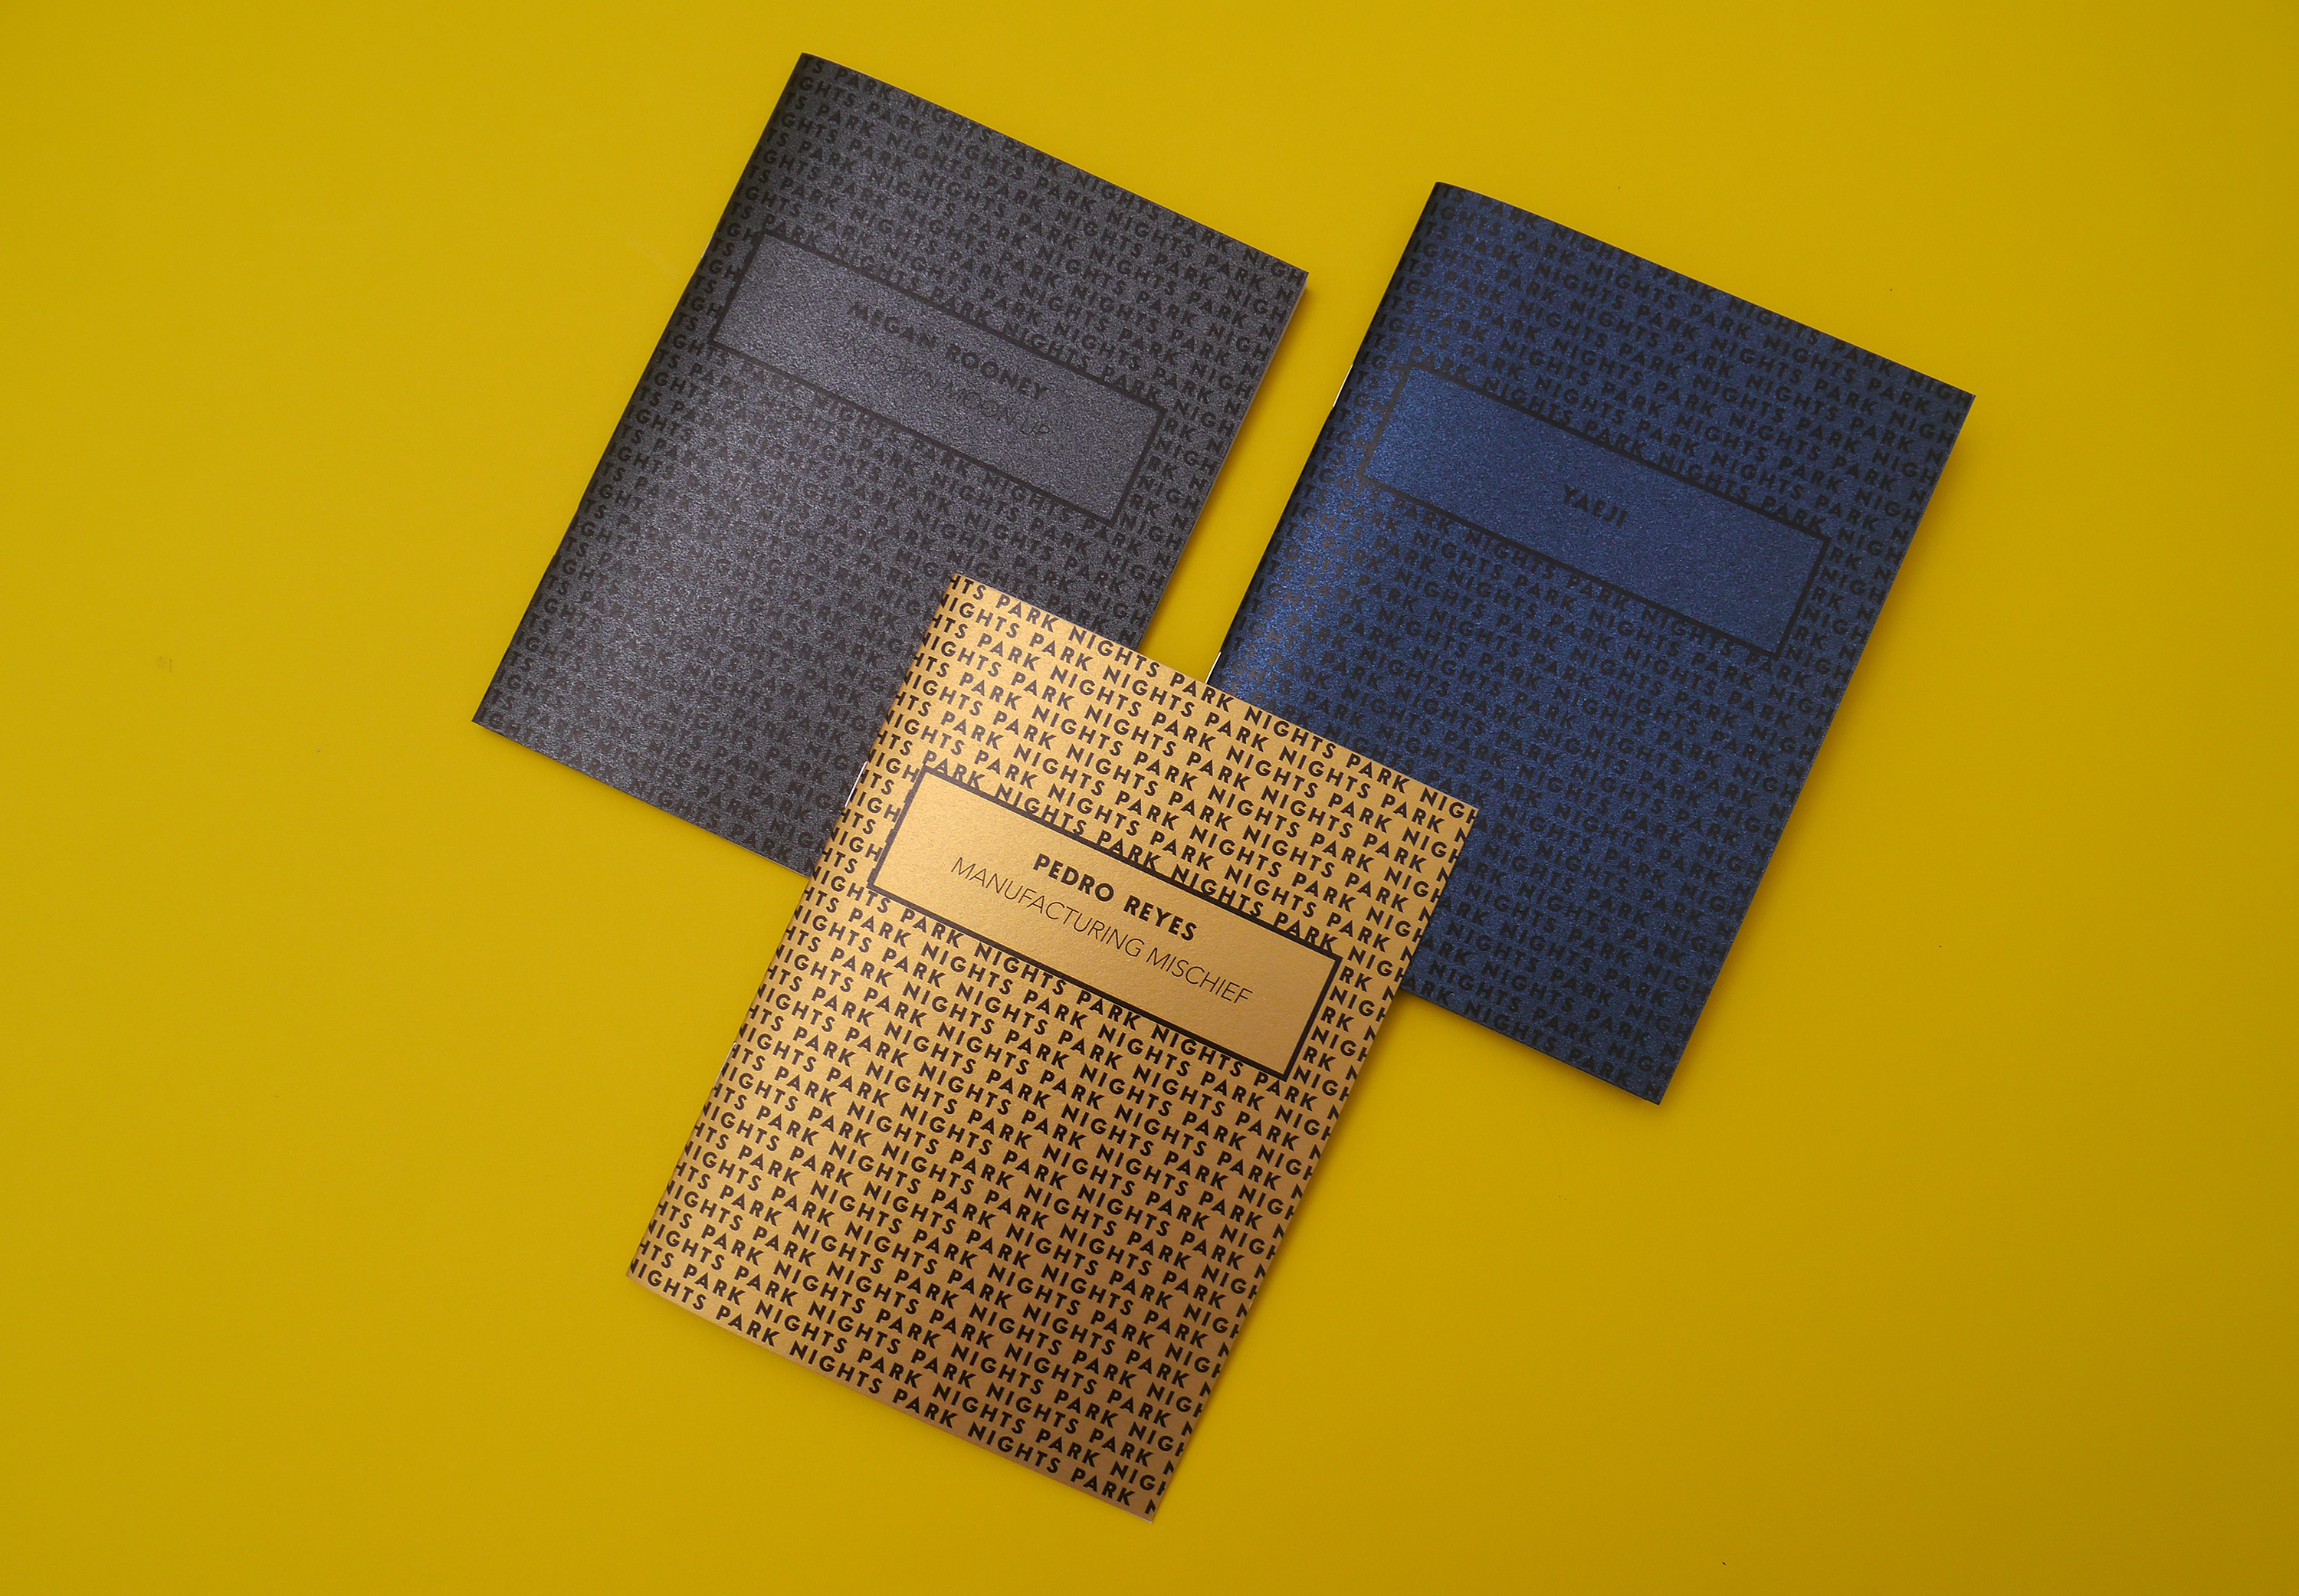 Three Park Nights programmes with metallic covers in gold, navy blue, and charcoal